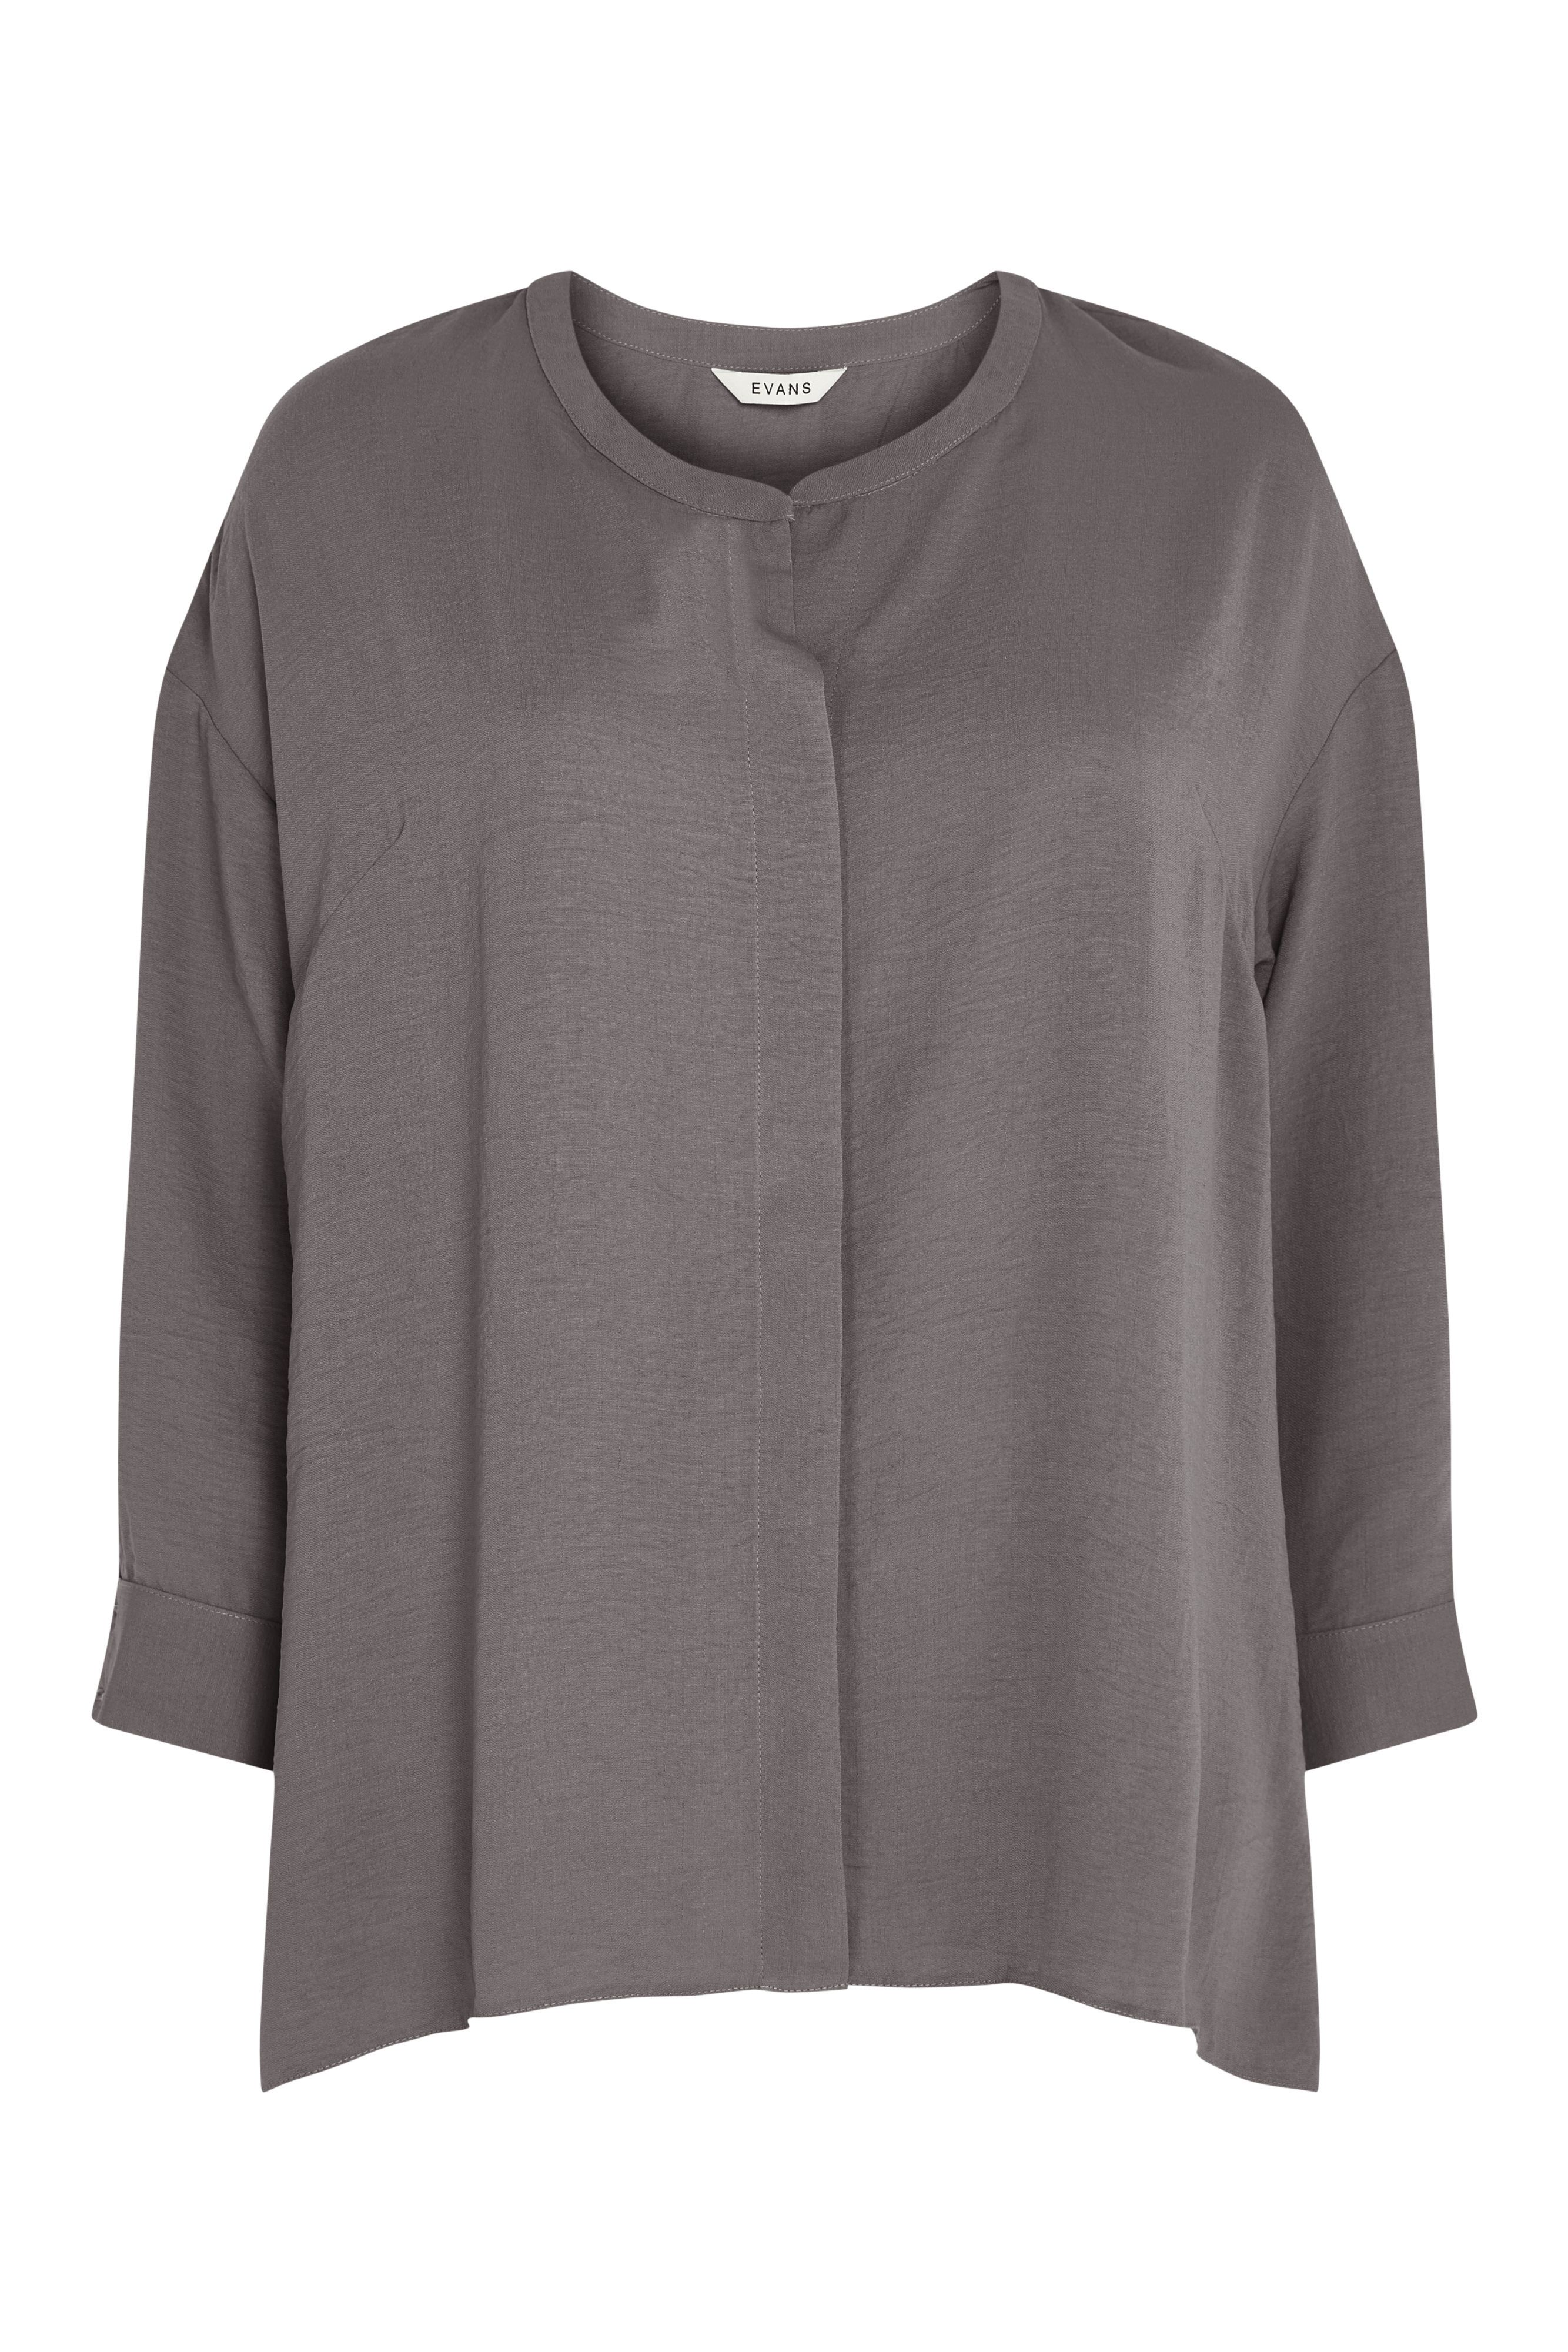 Beautifully soft and flattering as ever, the Relaxed Hi Lo Shirt makes a staple addition to any wardrobe. Flaunting a concealed button down front and contemporary collarless neckline, this shirt is bound to become your everyday go-to! Key Features Include: - Round neckline - Collarless - Concealed button down front - Long sleeves - Relaxed fit - Curved hemline - Hip length Team with distressed denim, chunky trainers and a roomy tote for weekend styling perfection.